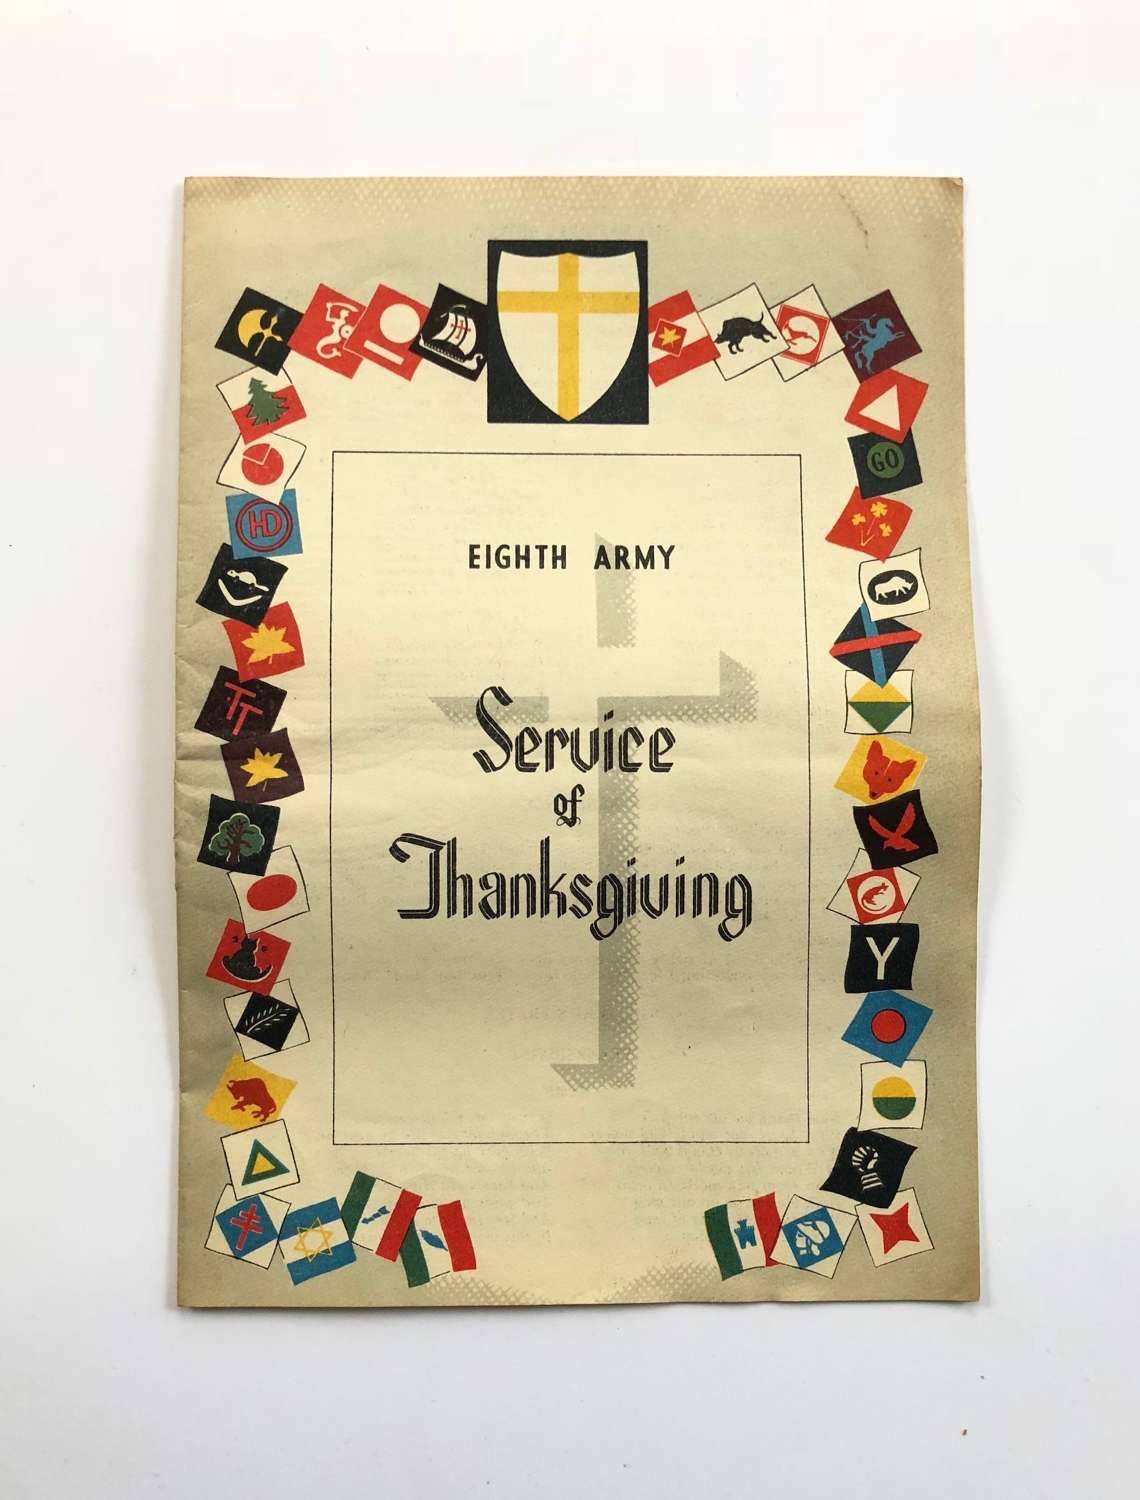 WW2 8th Army Service of Thanks Giving leaflet.